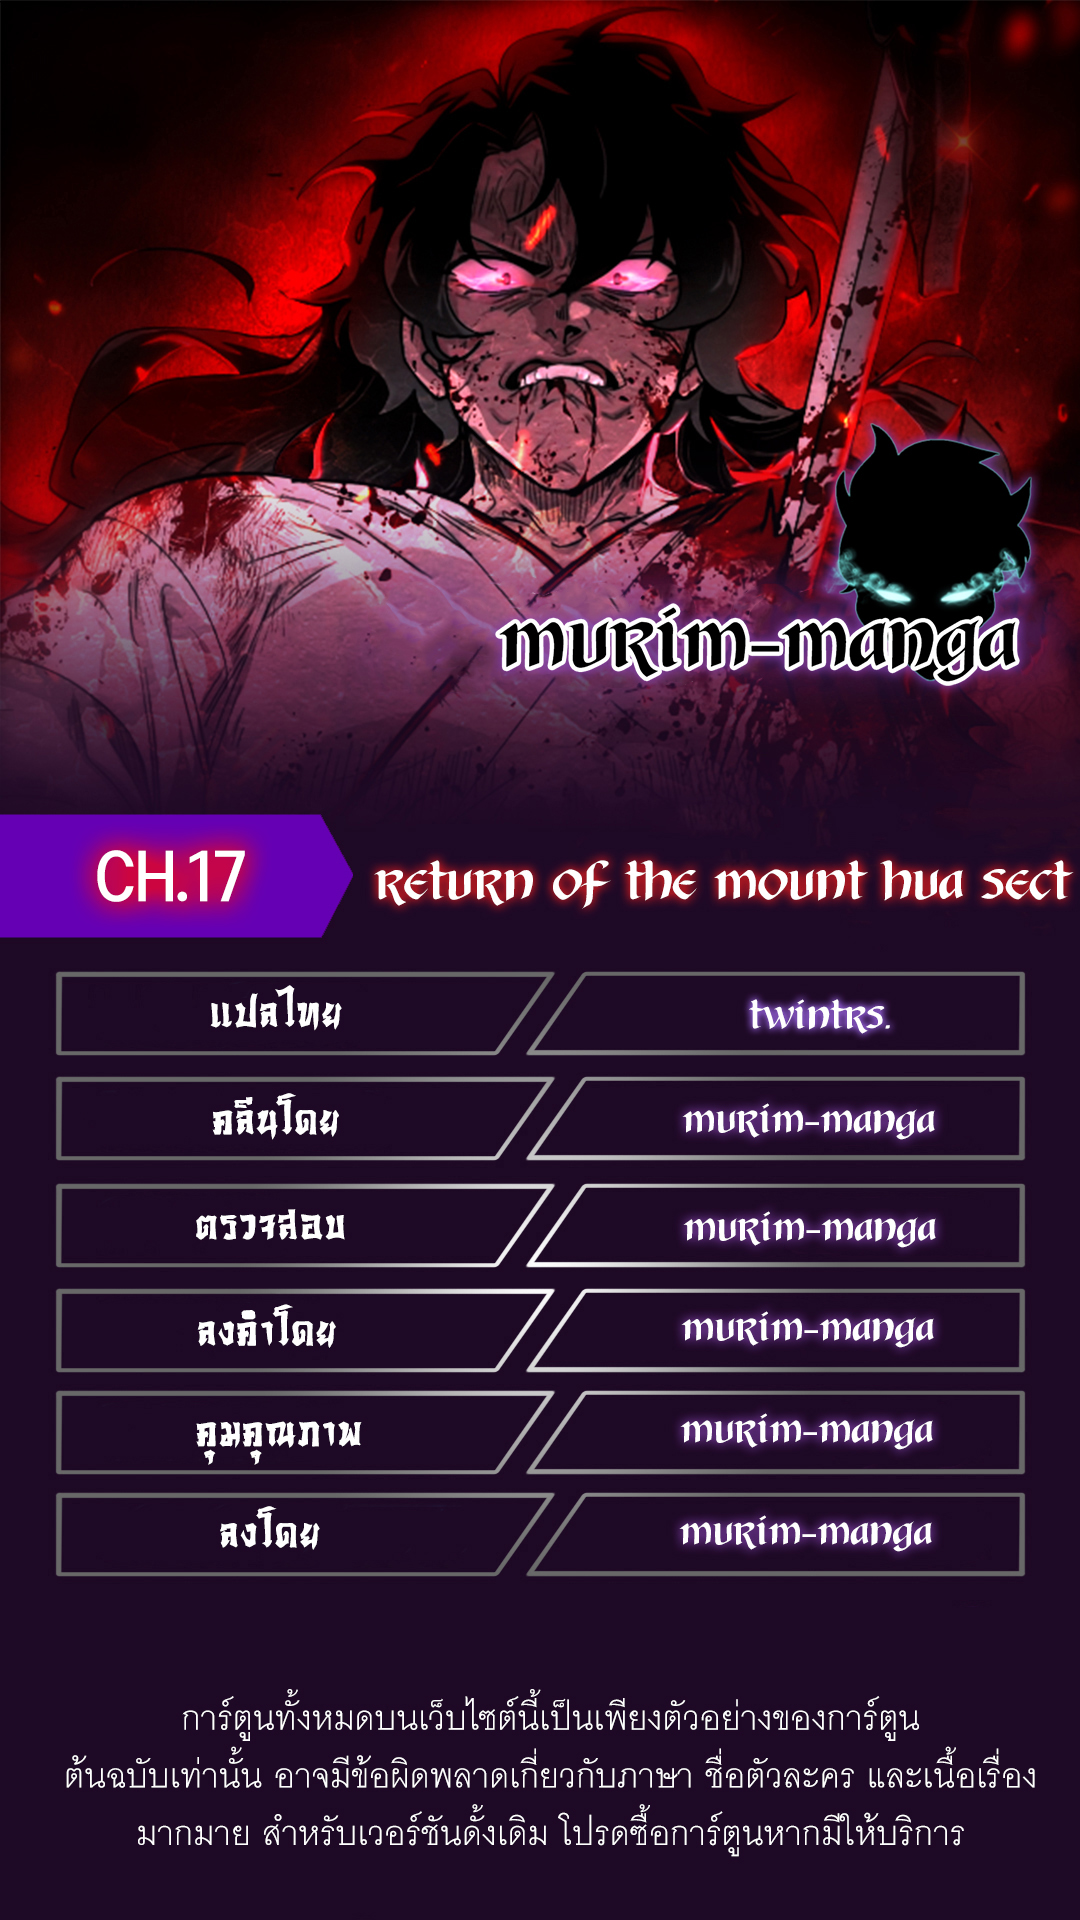 Return of the Flowery Mountain Sect 17 01